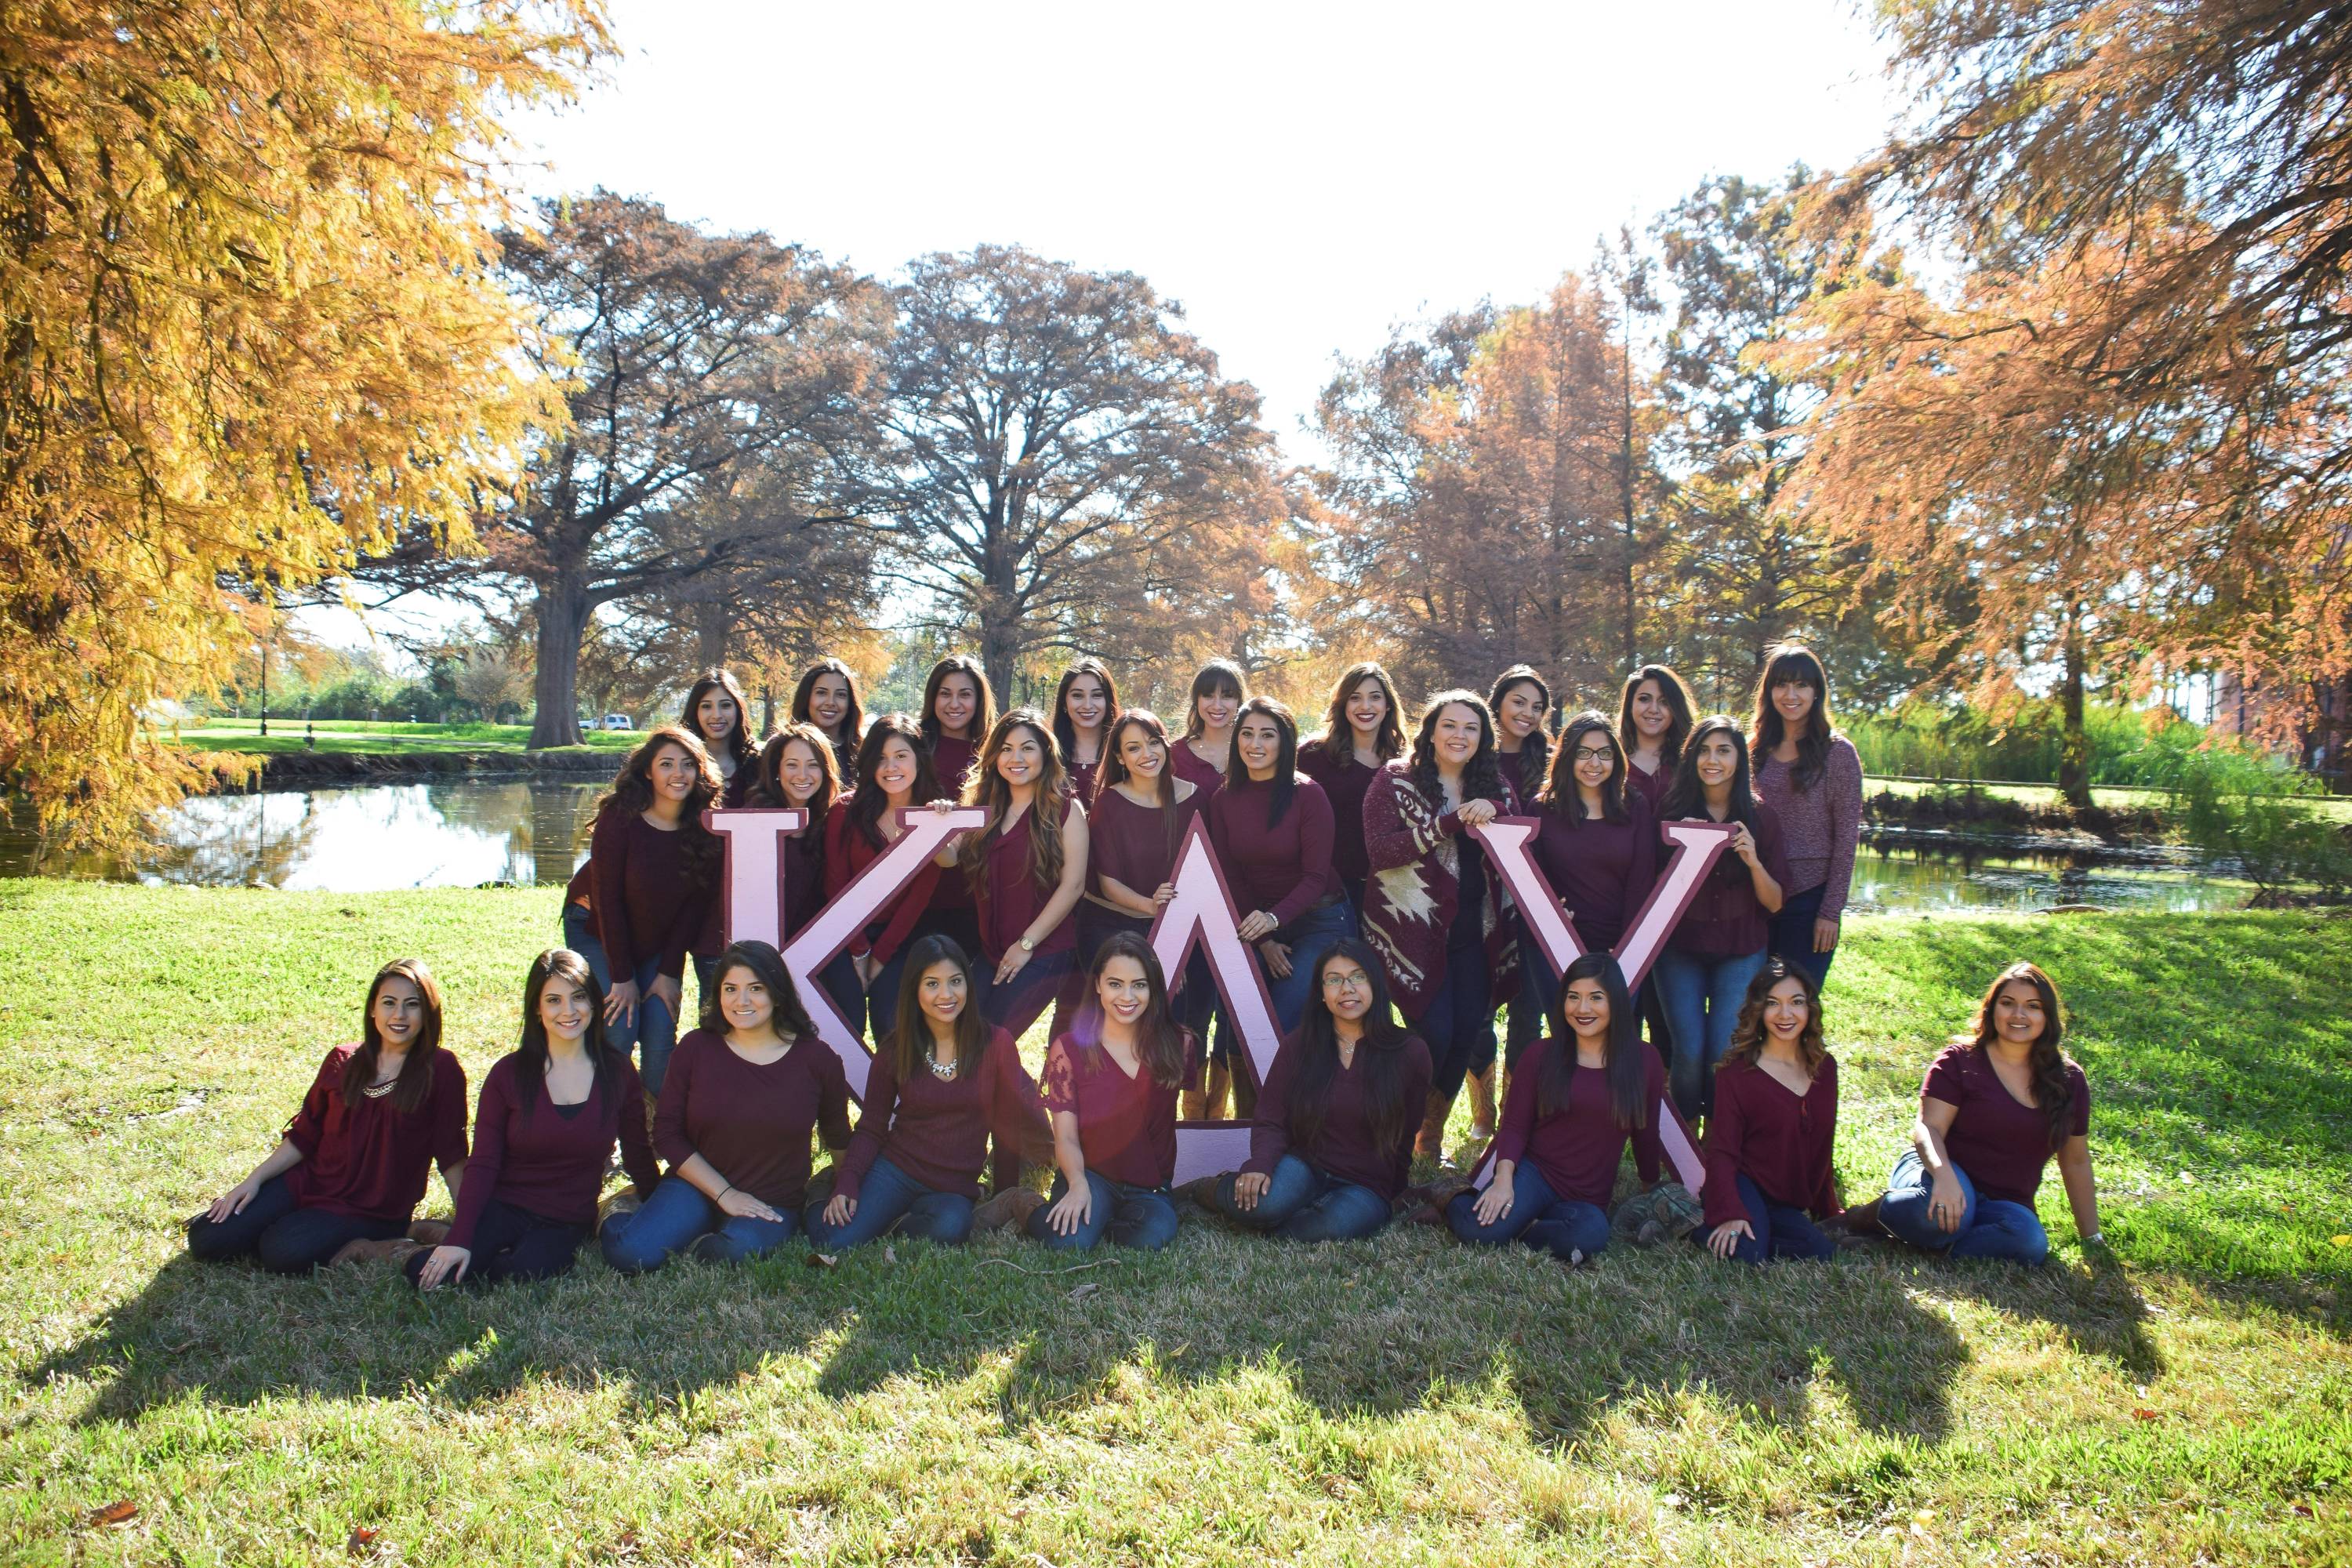 Women of Kappa Delta Chi all matching wearing jeans and maroon tops, posing in front of the ponds by the Theatre Building